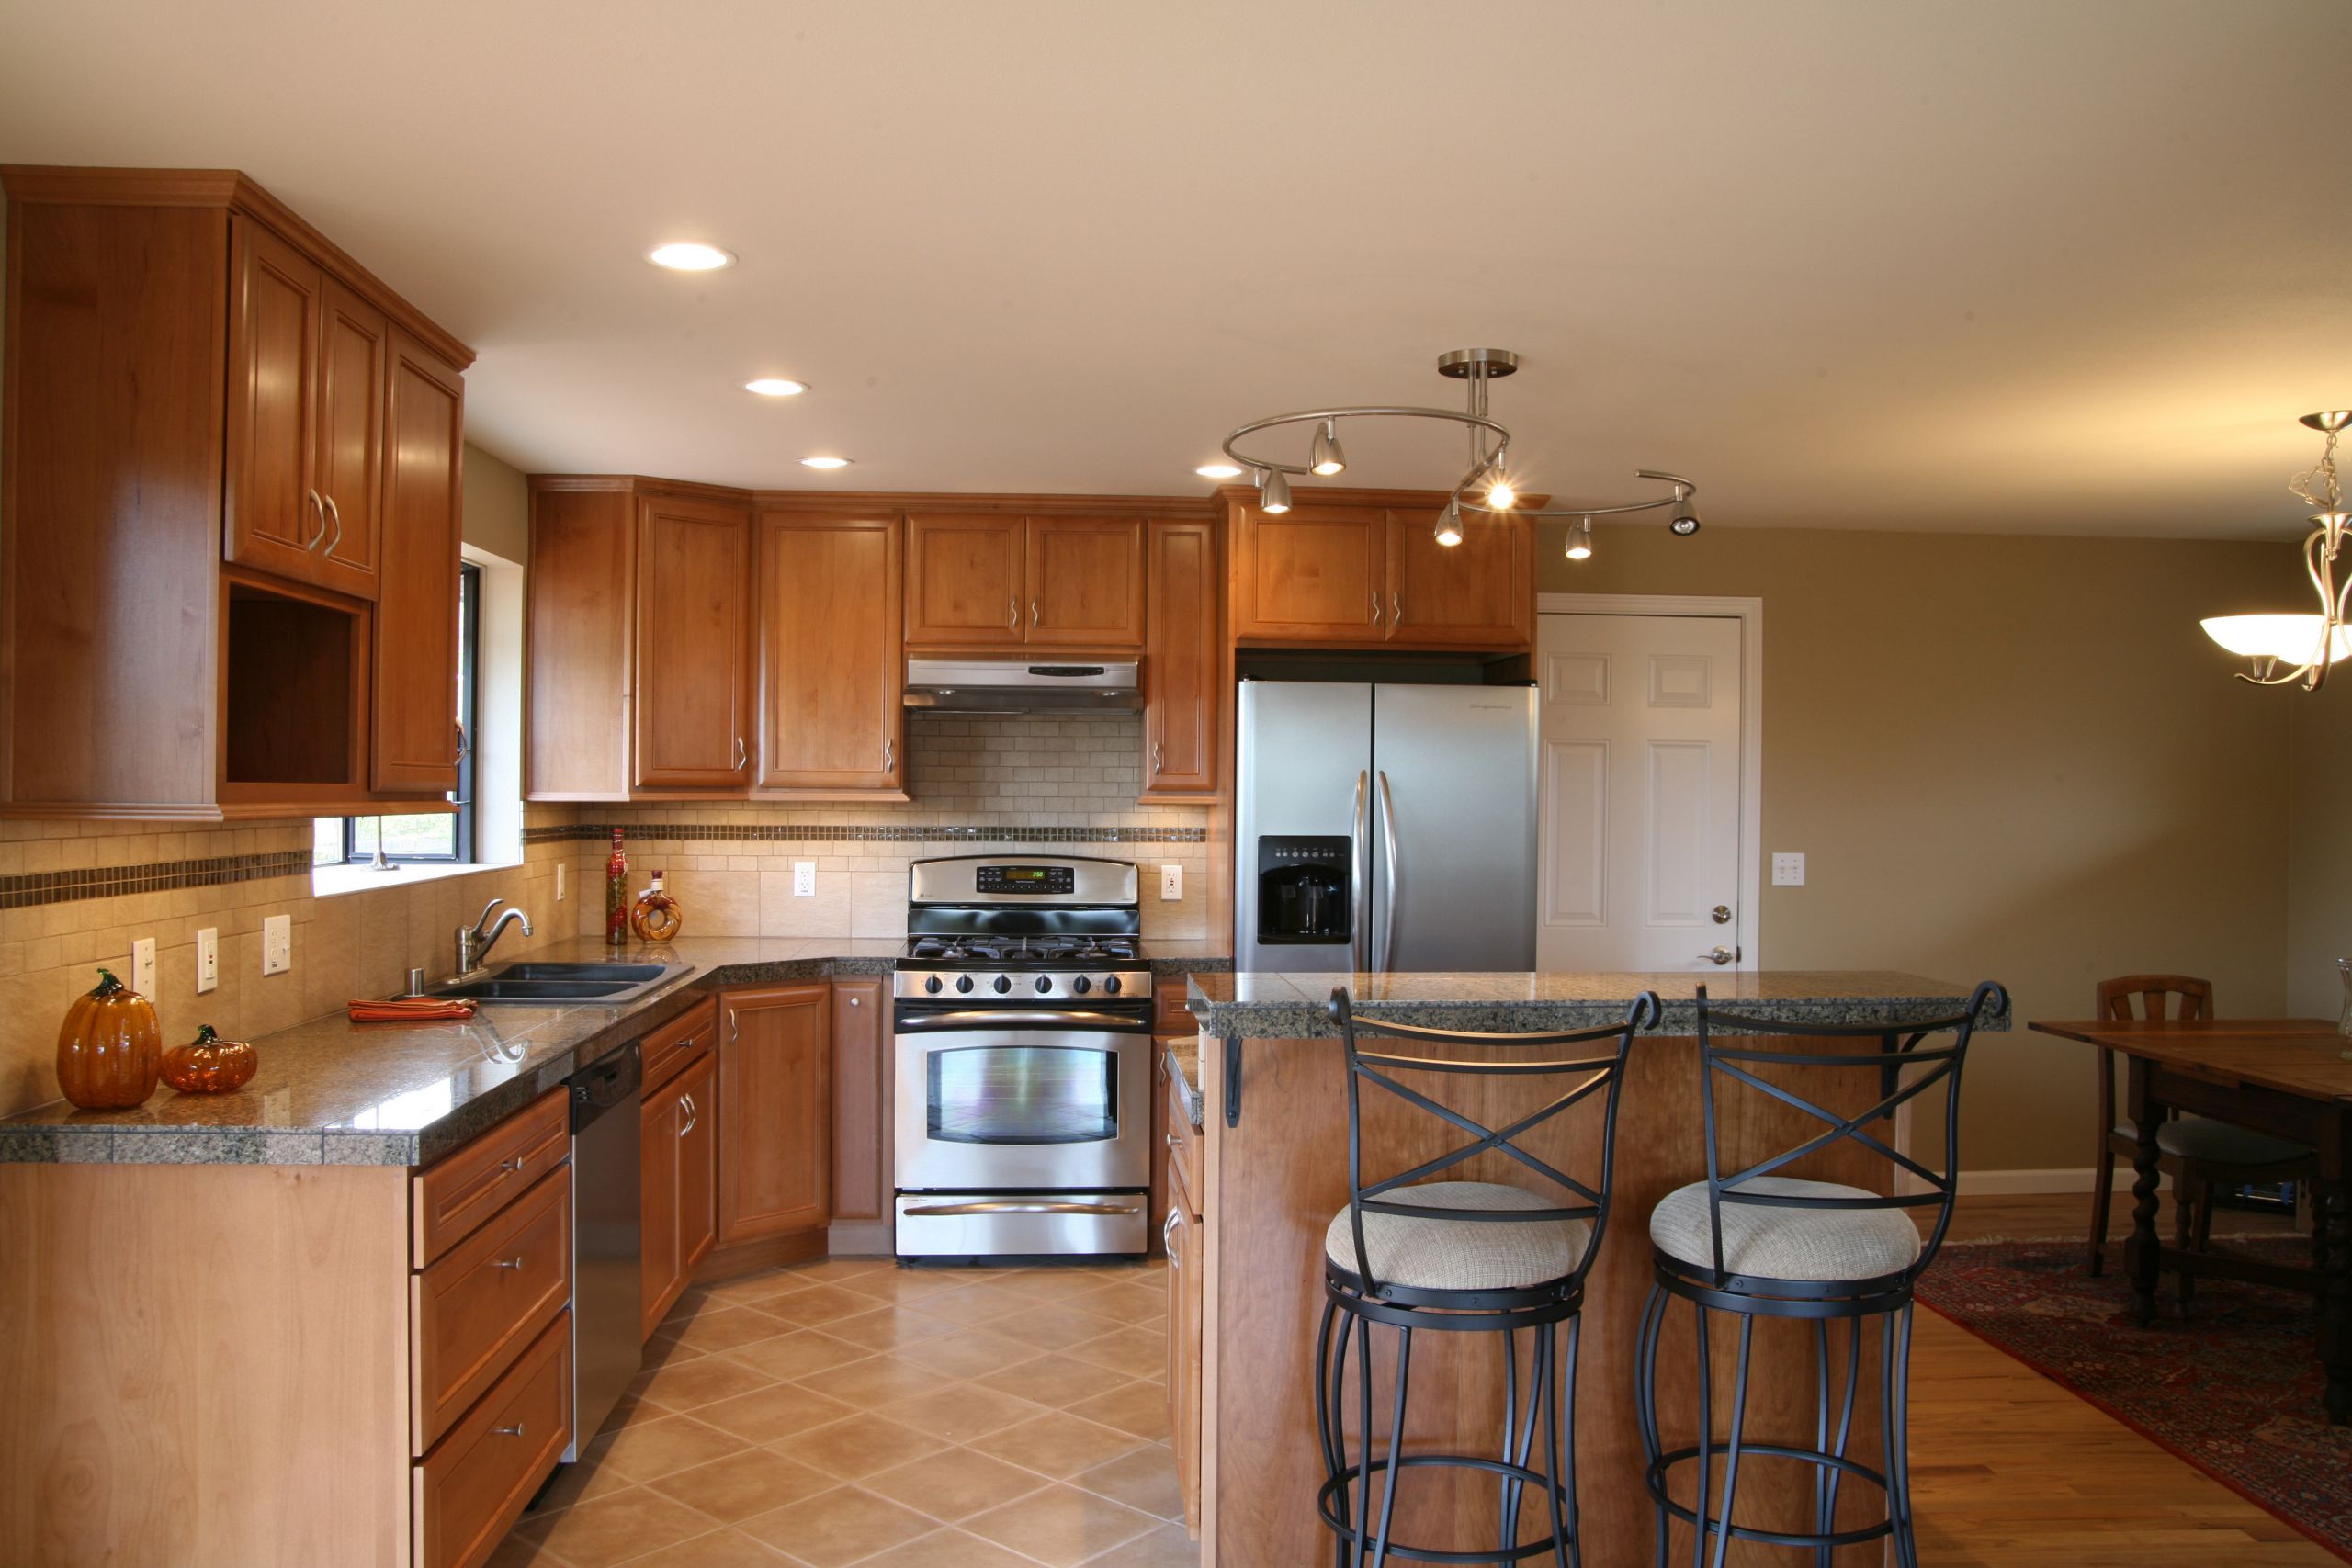 Kitchen Remodel Pics
 Add value to your home with Upscale Kitchen Remodeling